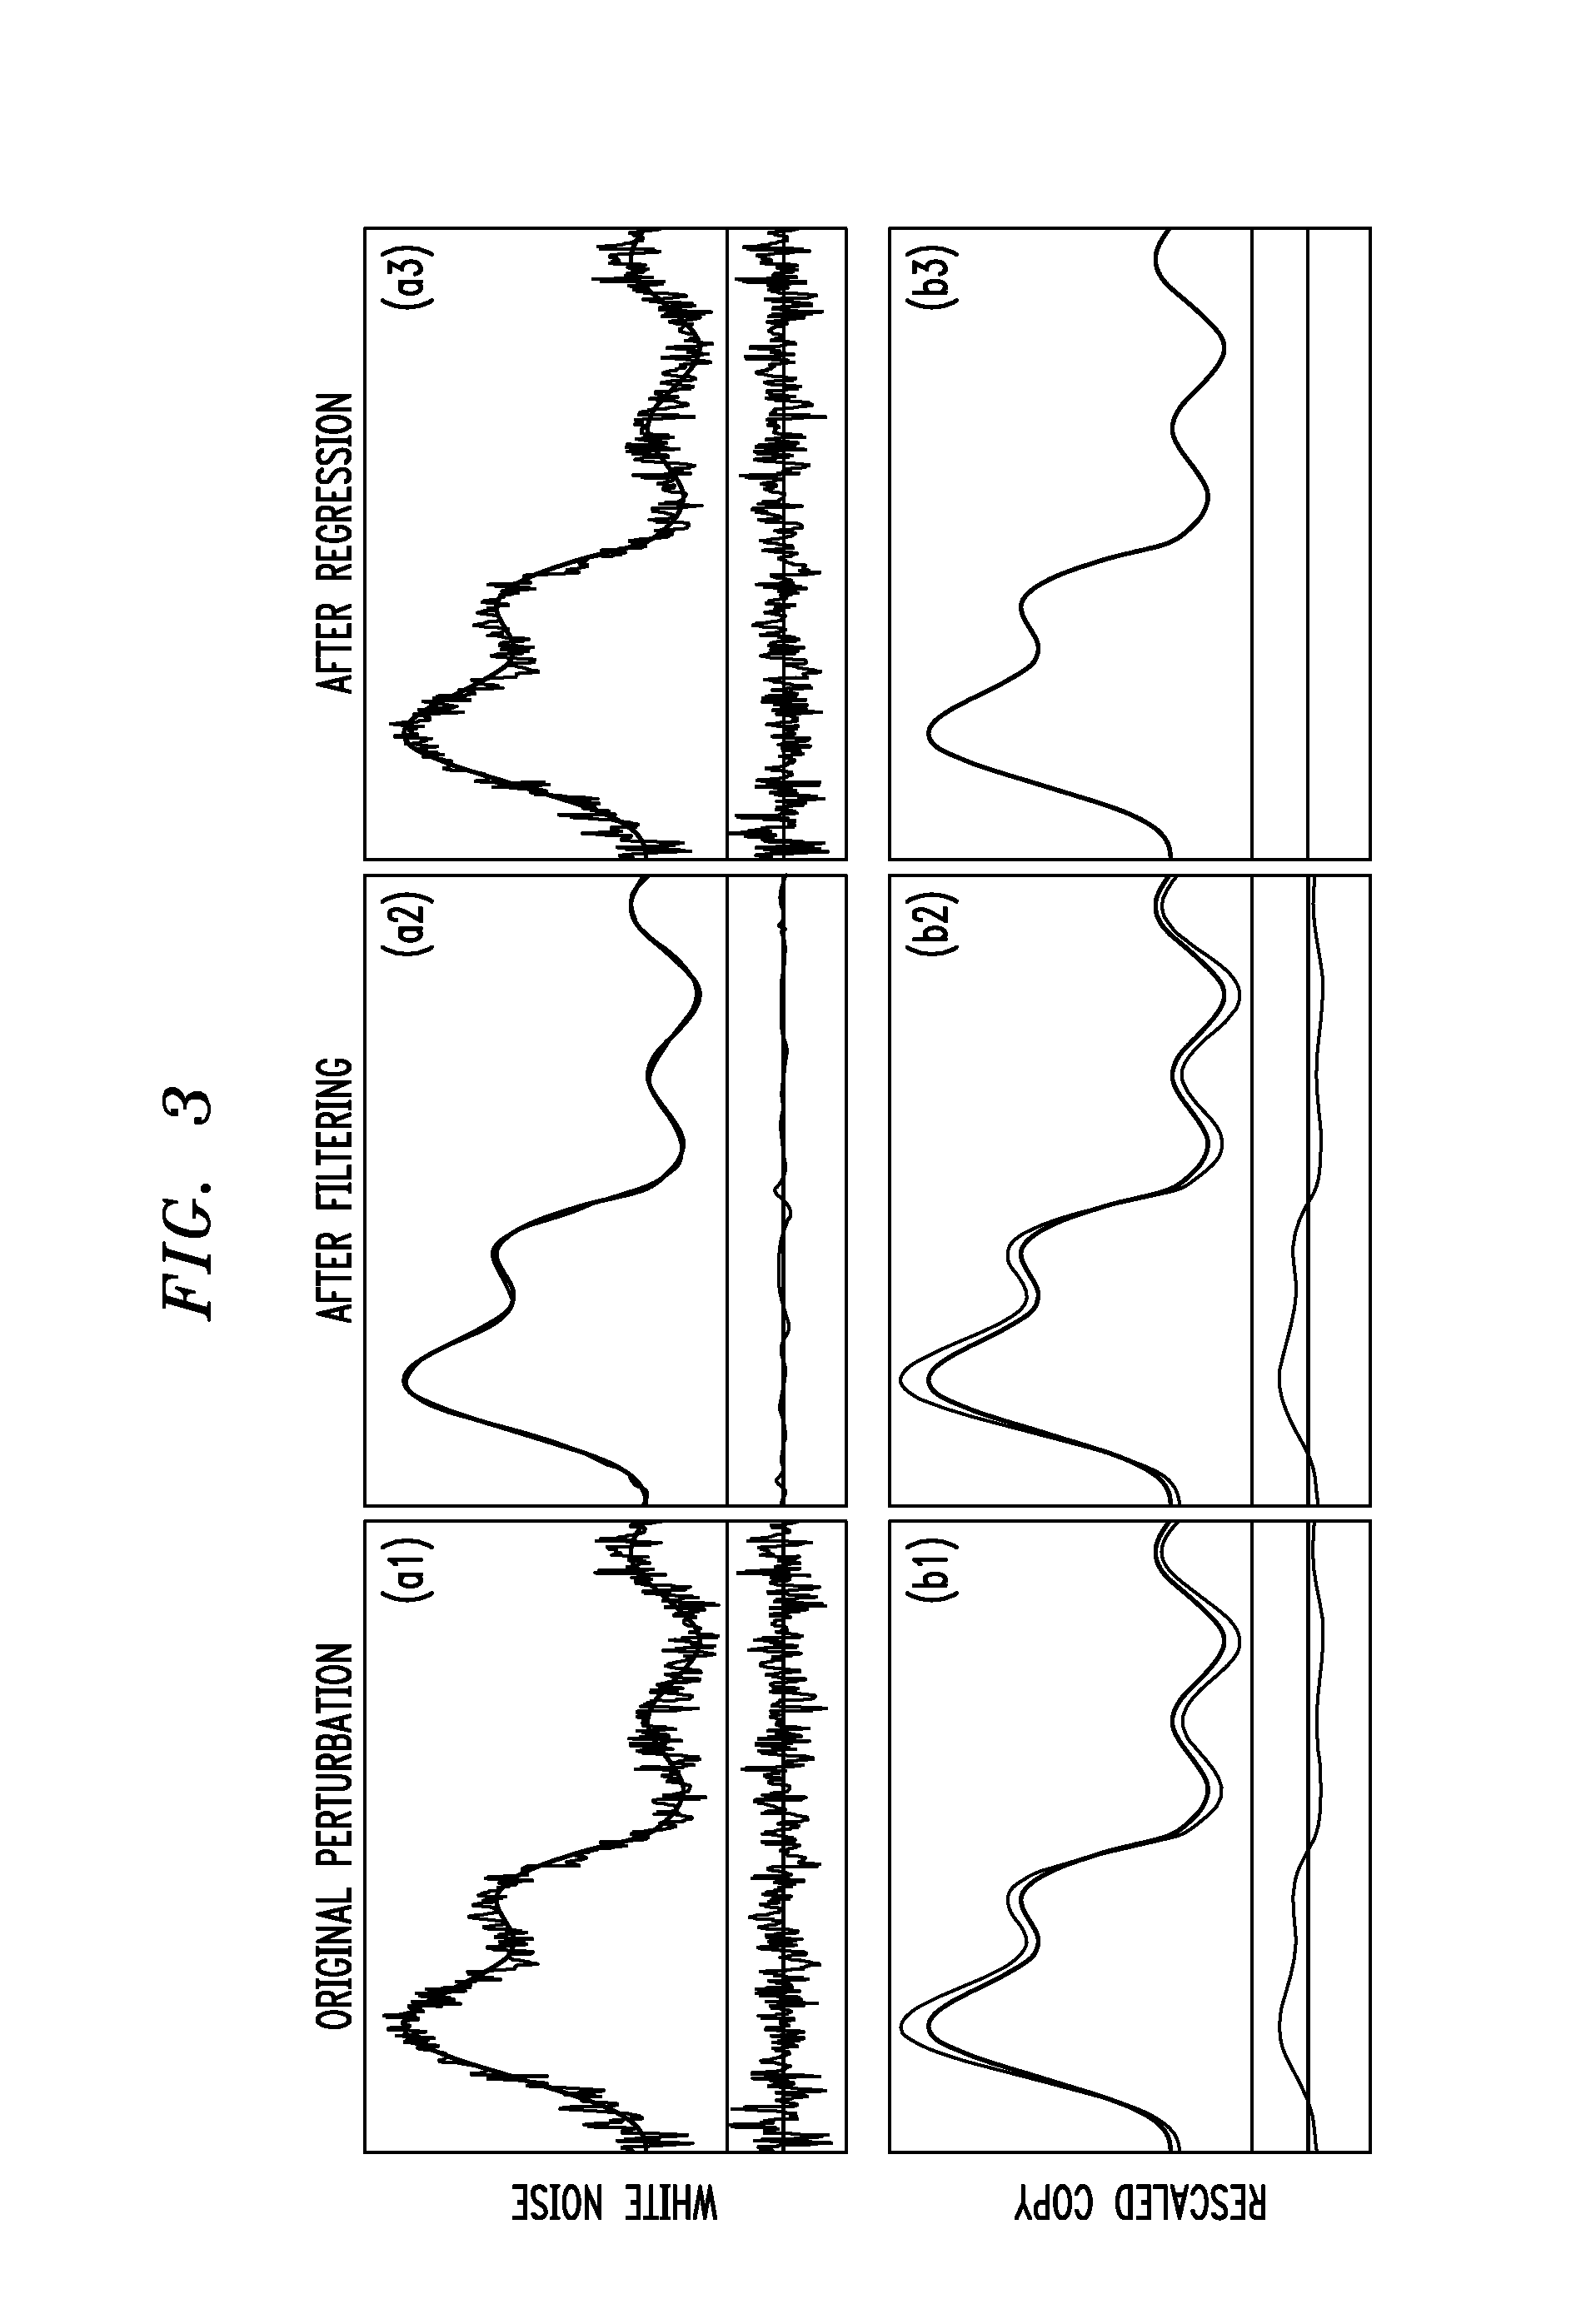 Methods and apparatus for perturbing an evolving data stream for time series compressibility and privacy